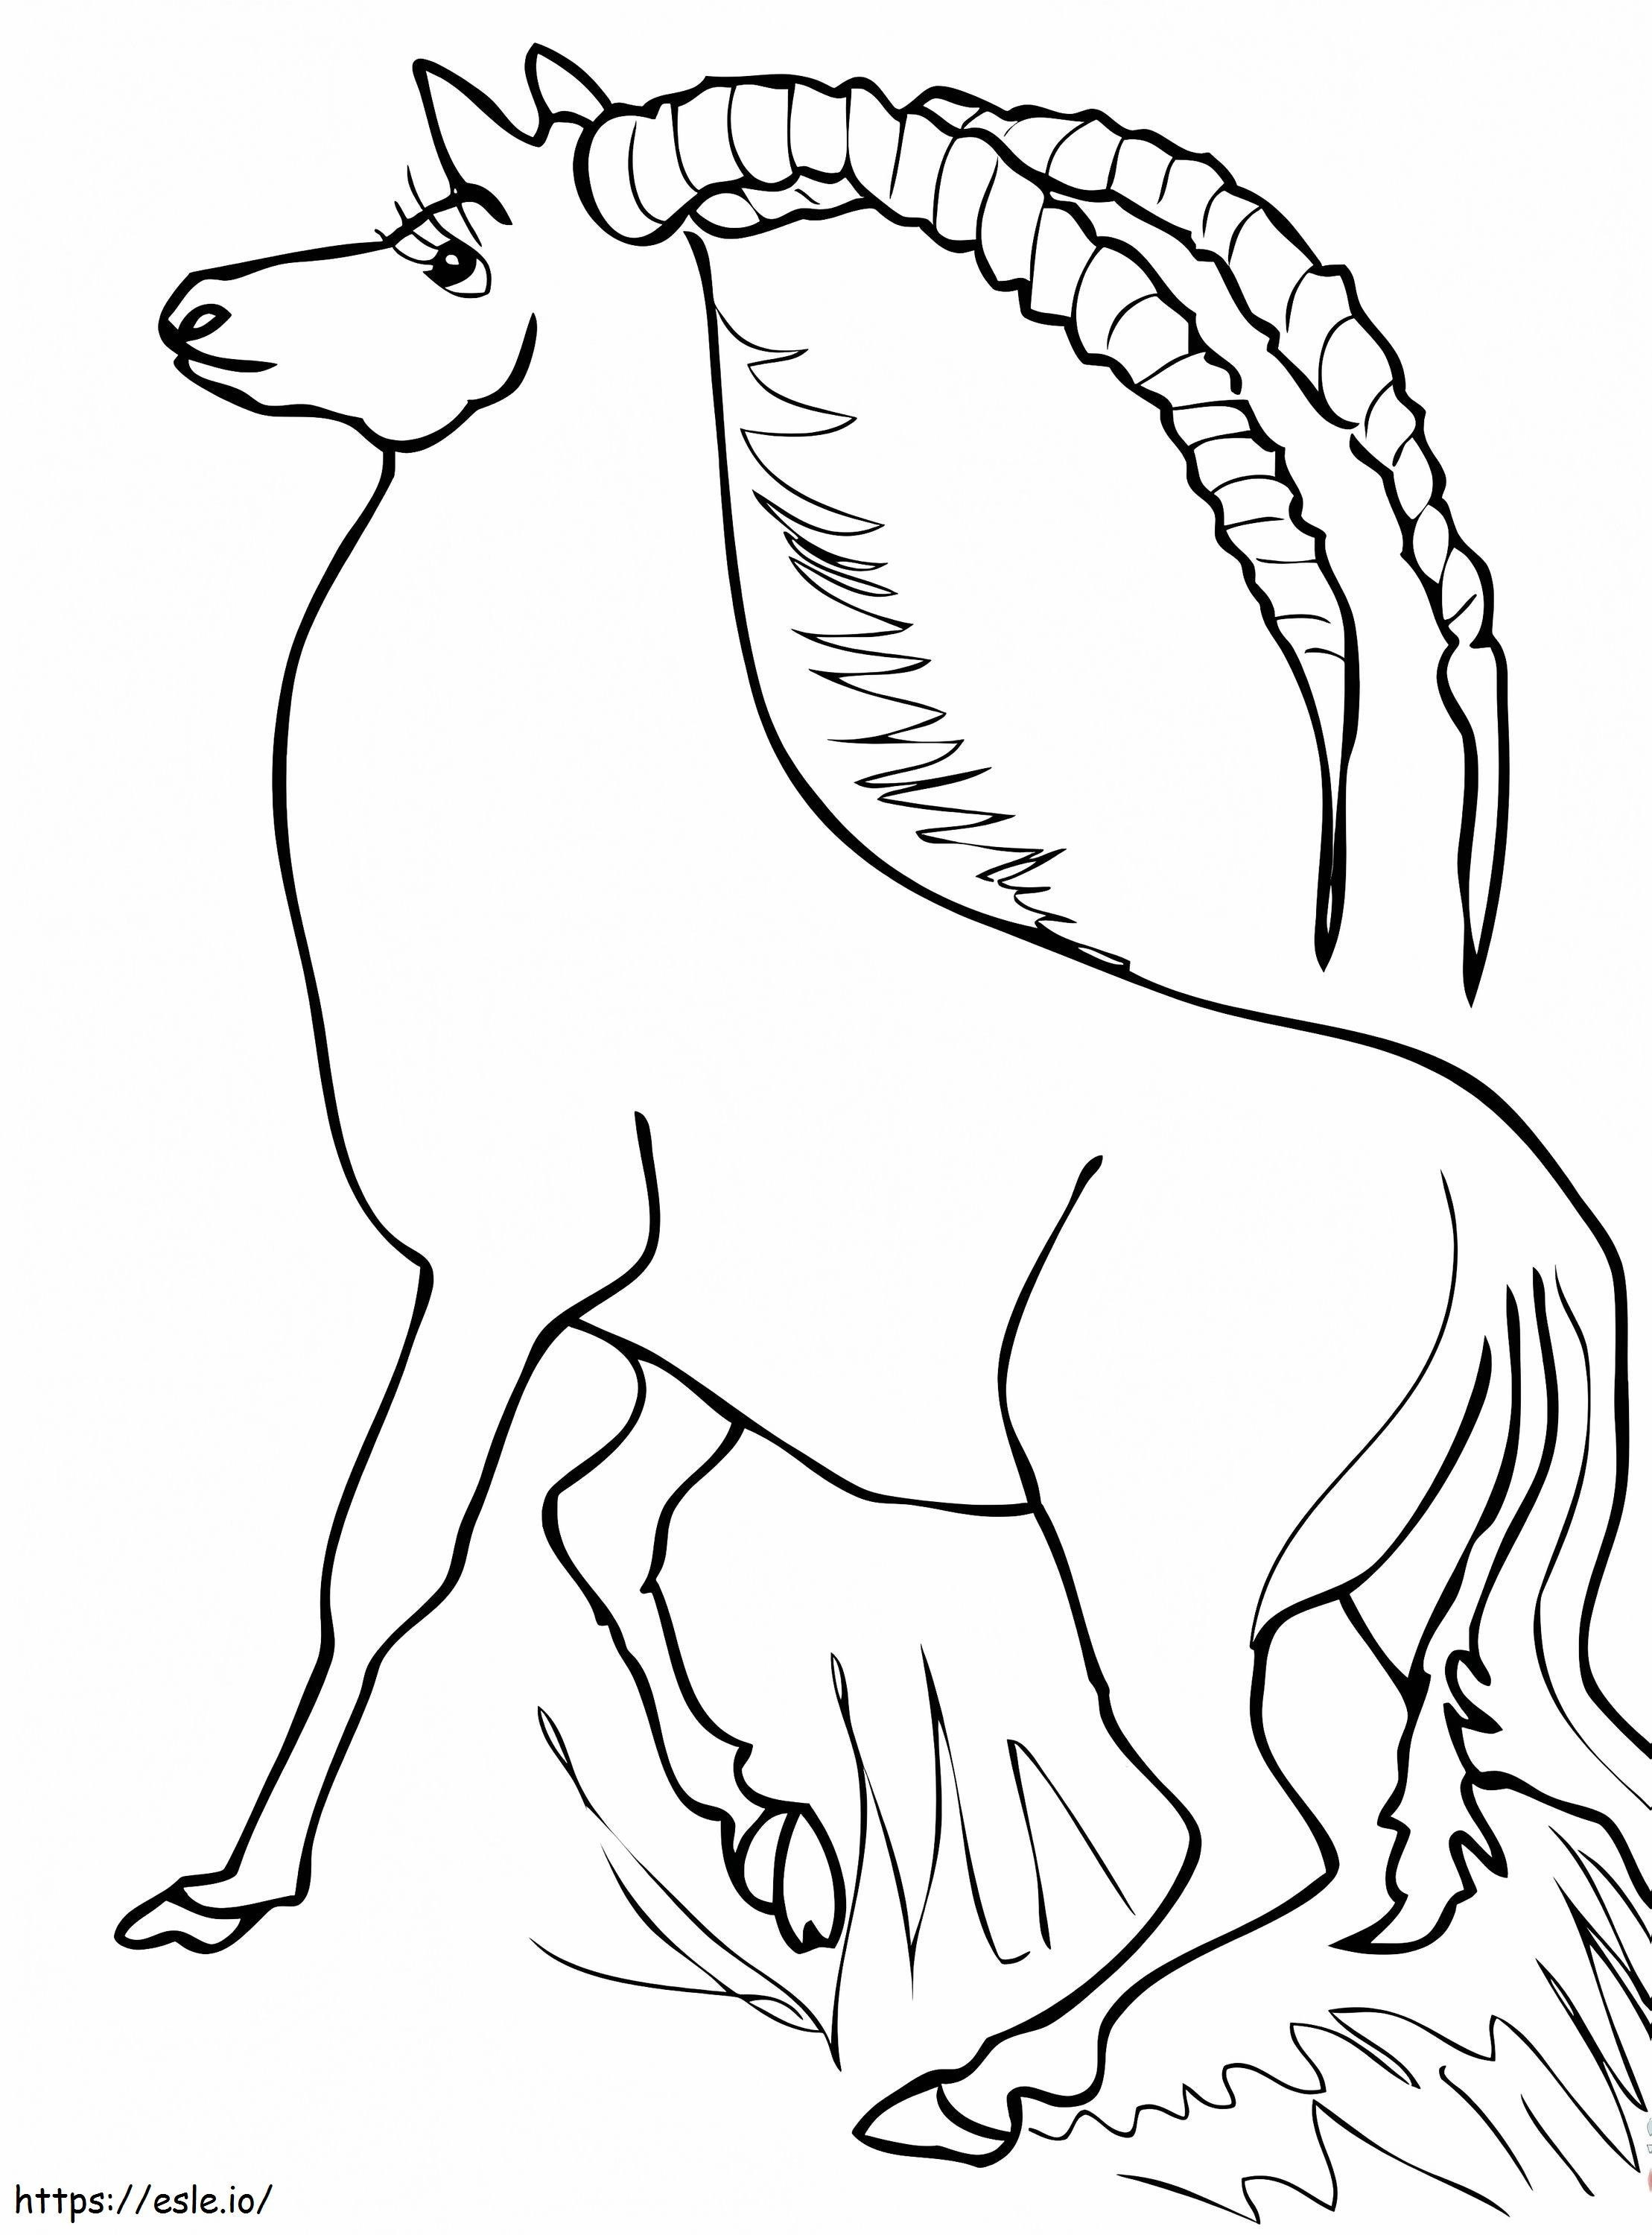 Africa Sable Antelope coloring page